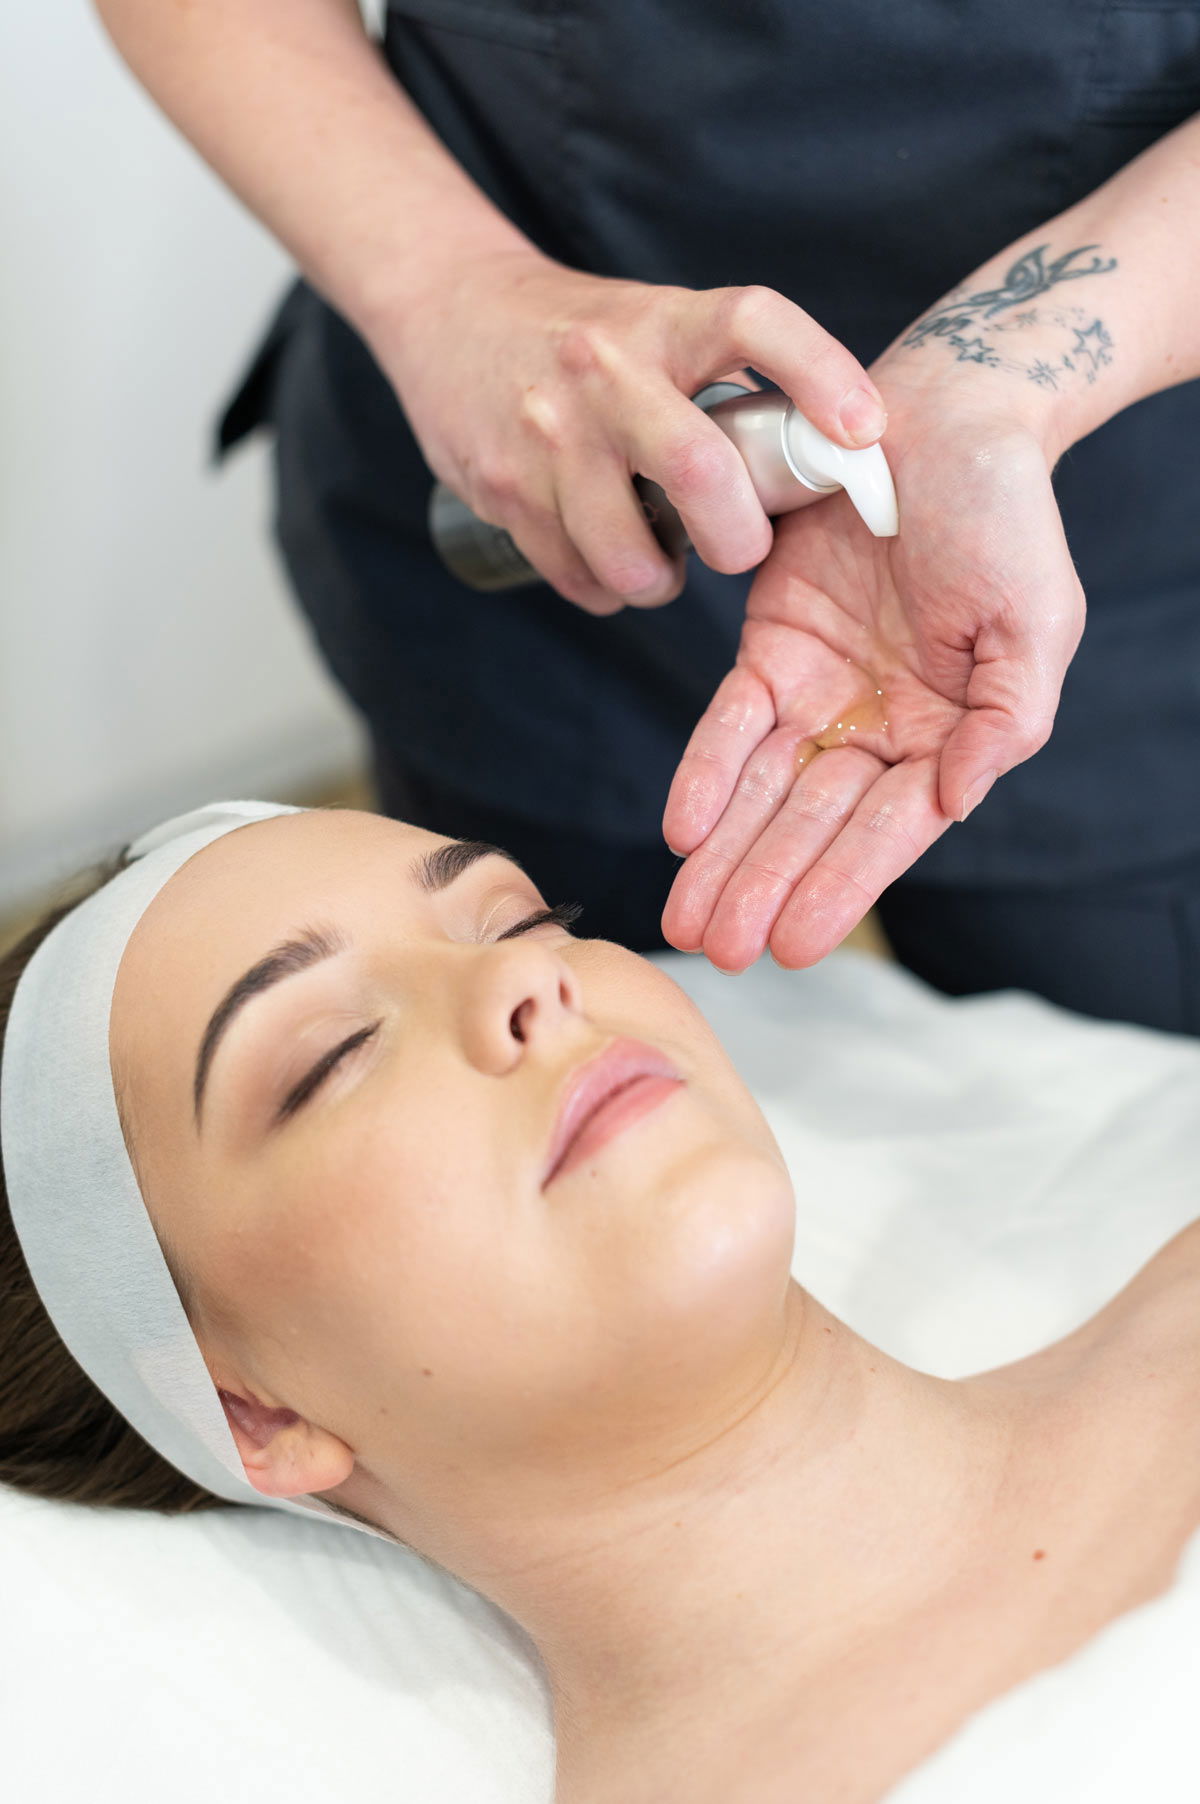 Top three treatments we recommend at Face Fit for a healthier clearer skin